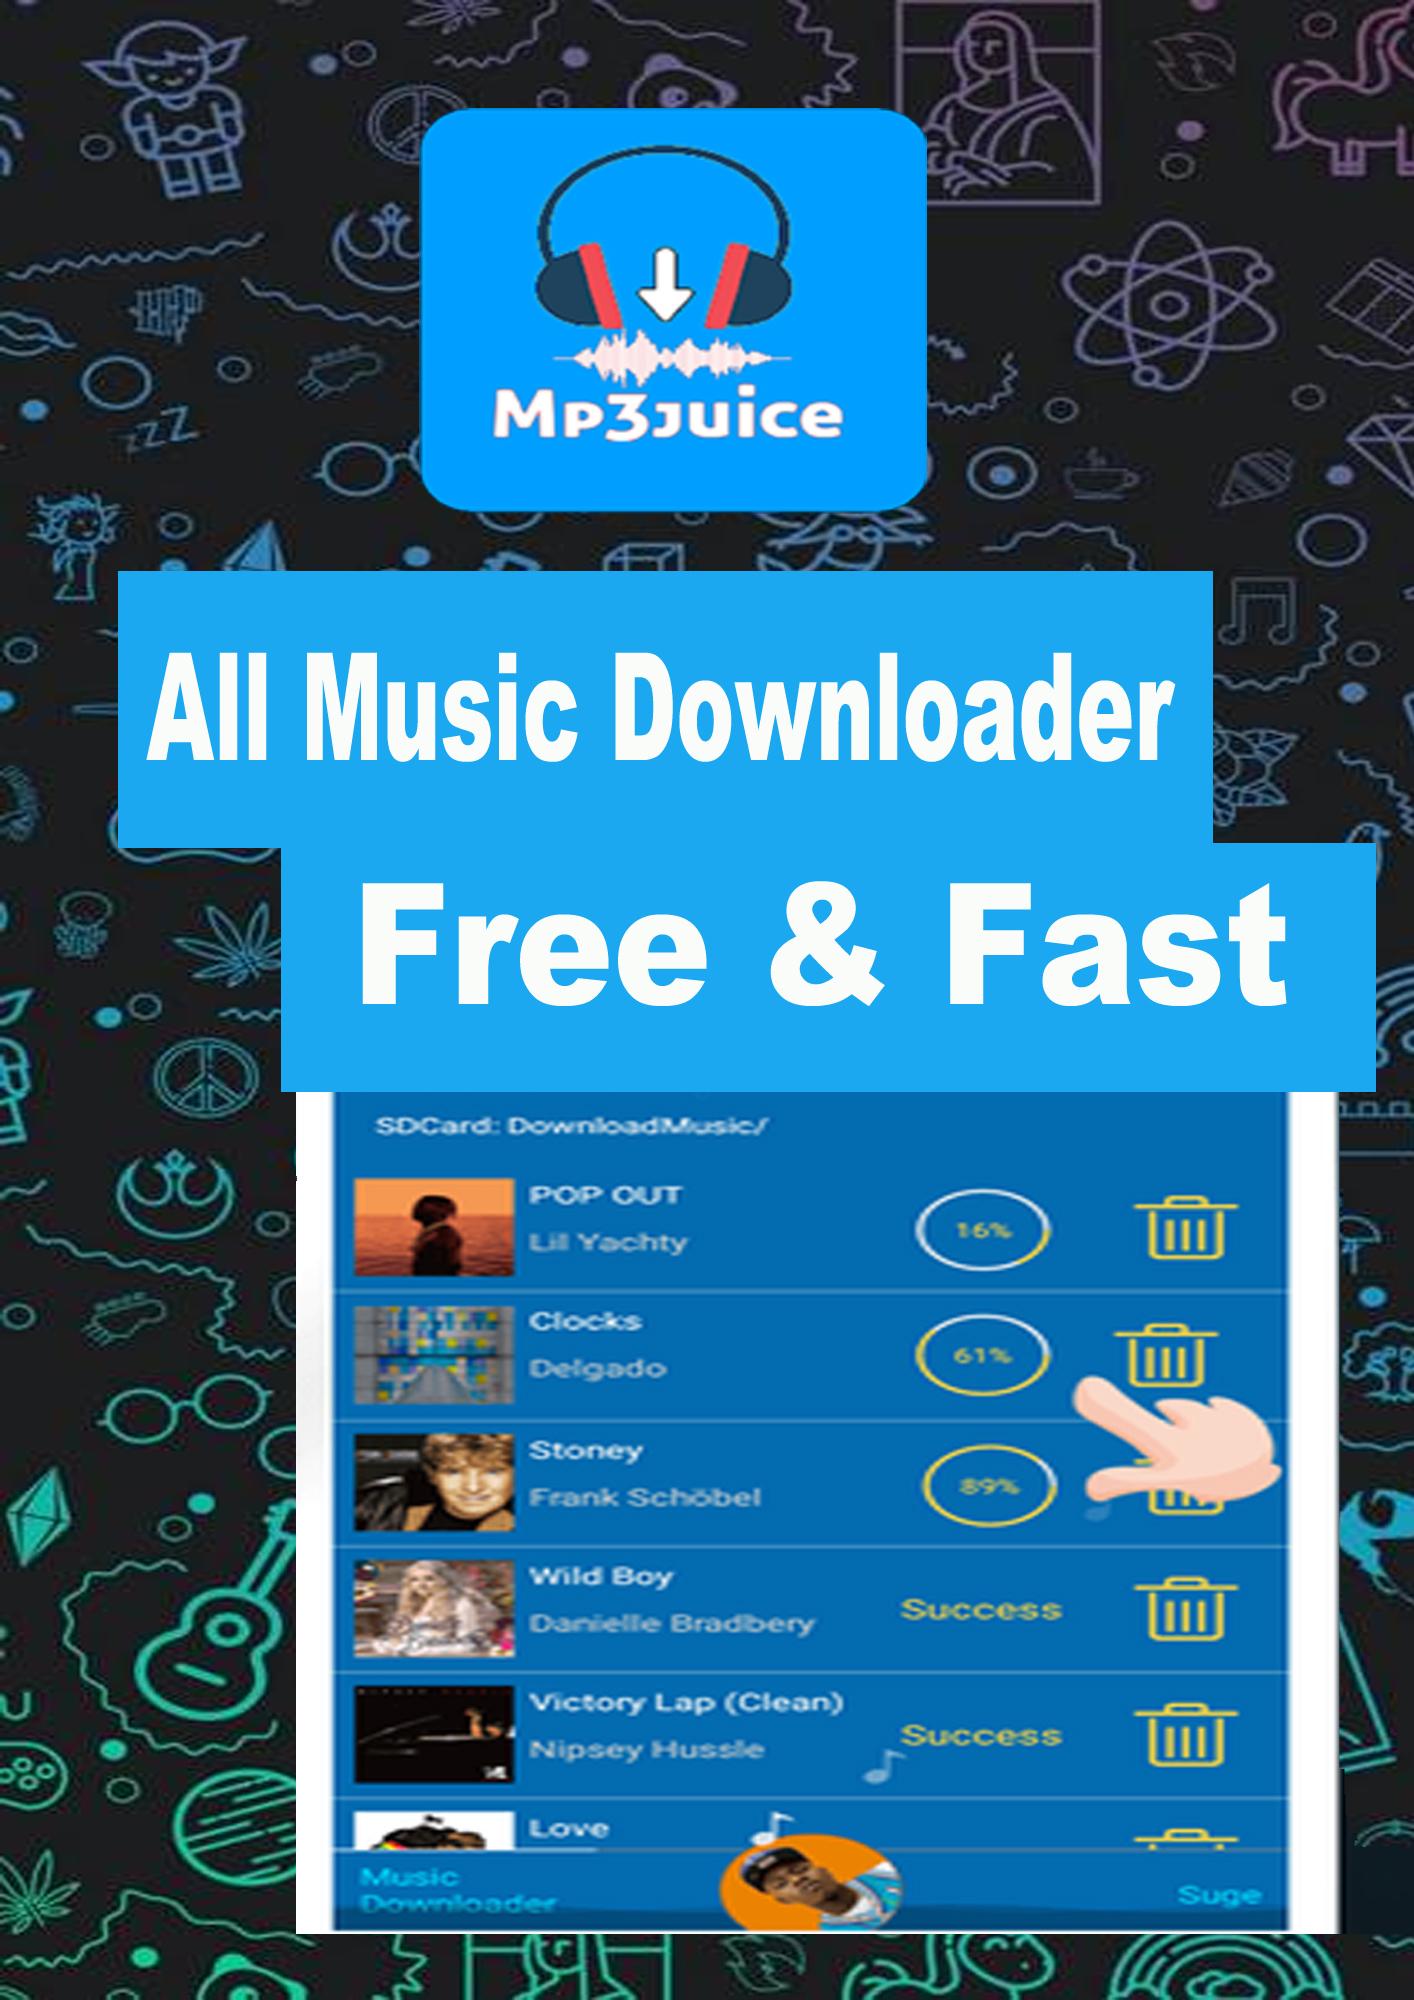 JuiceMp3 - Free Music Downloader for Android - APK Download